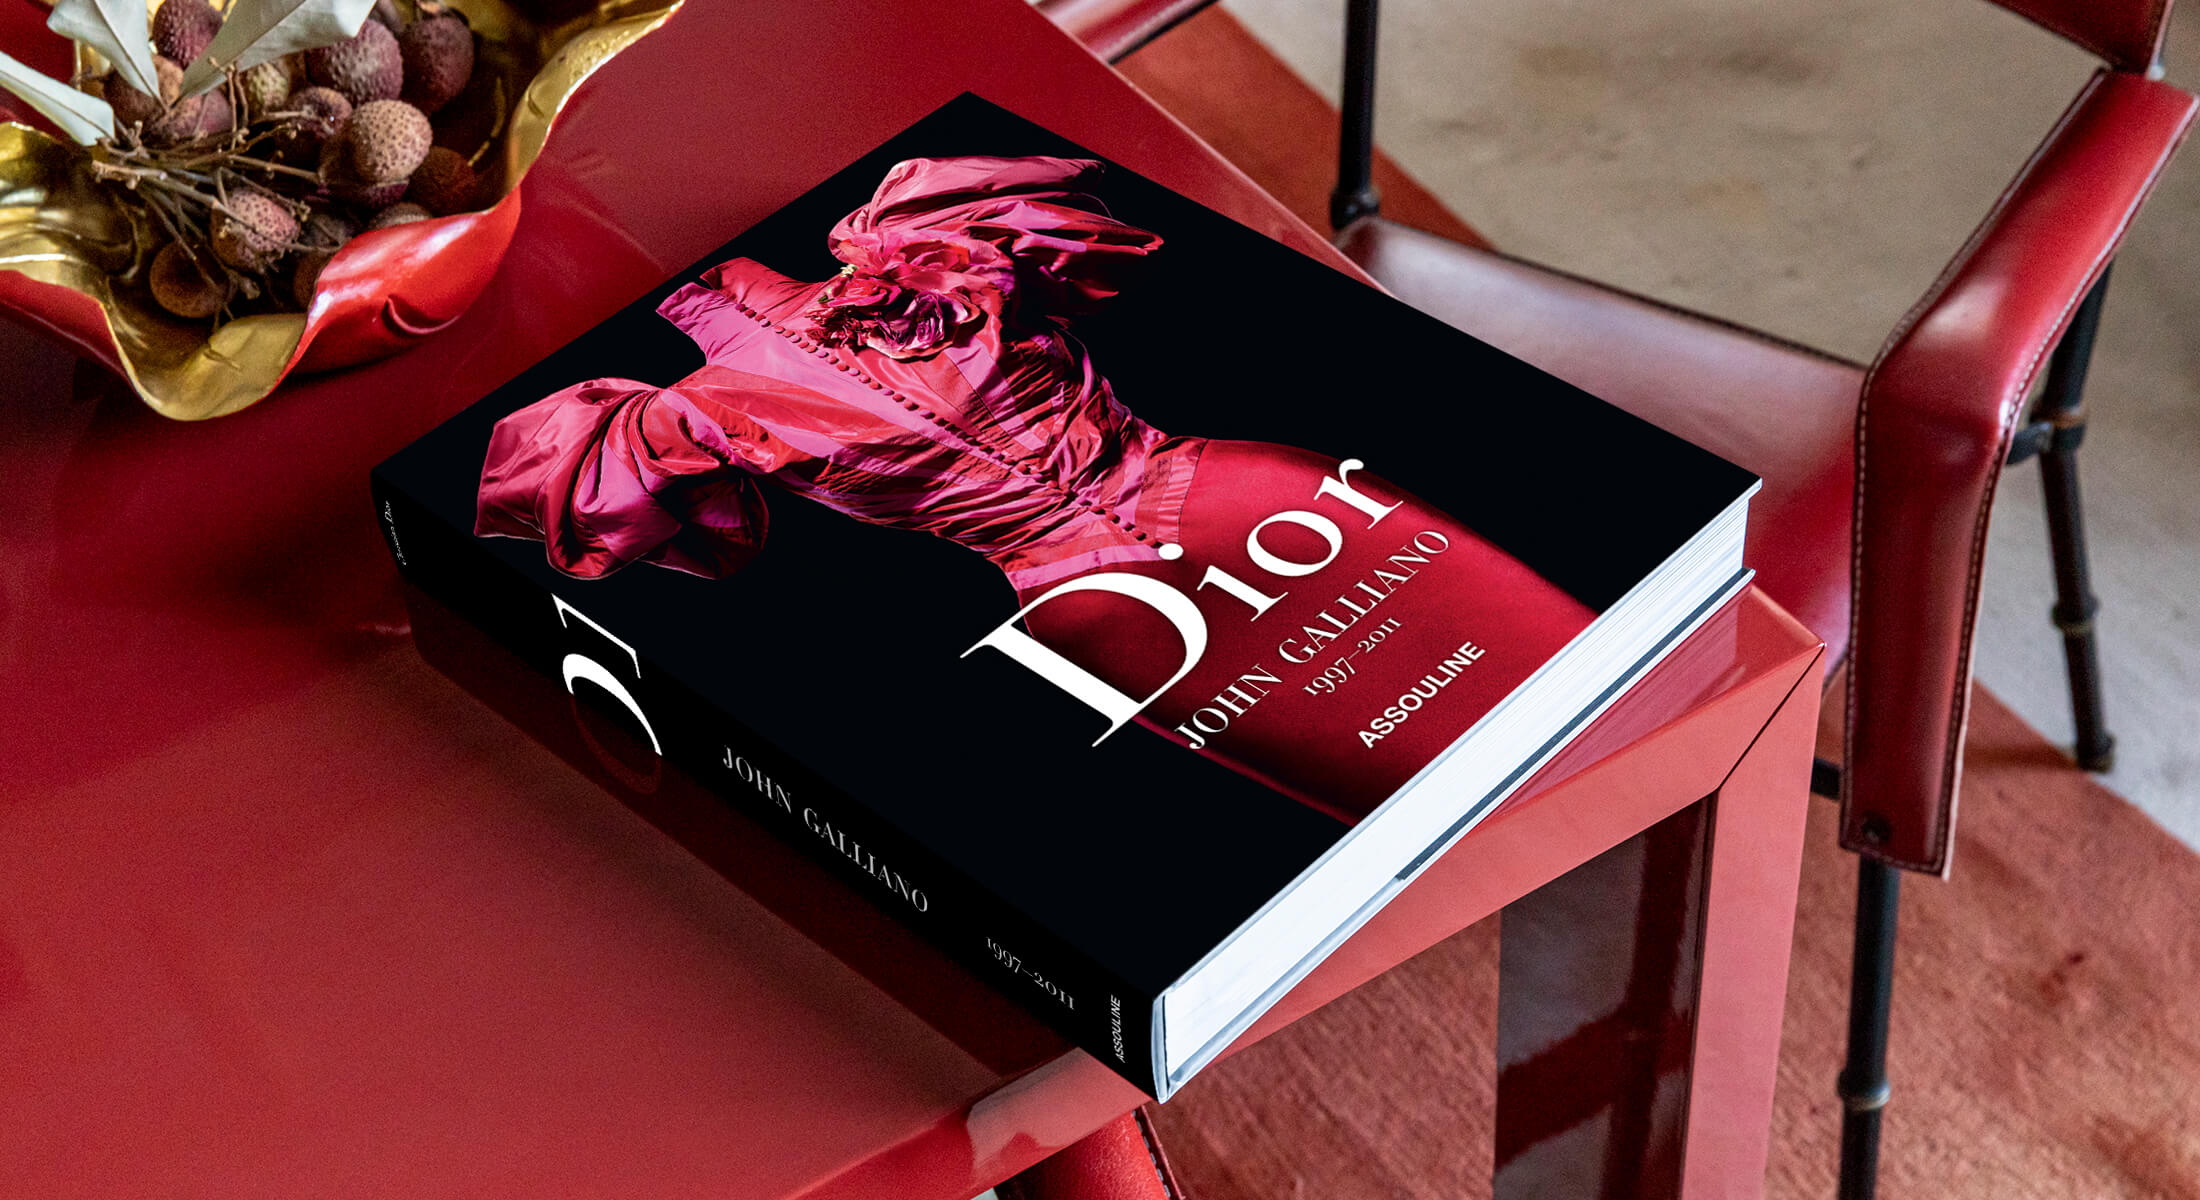 Dior by John Galliano by Andrew Bolton - Coffee Table Book | ASSOULINE